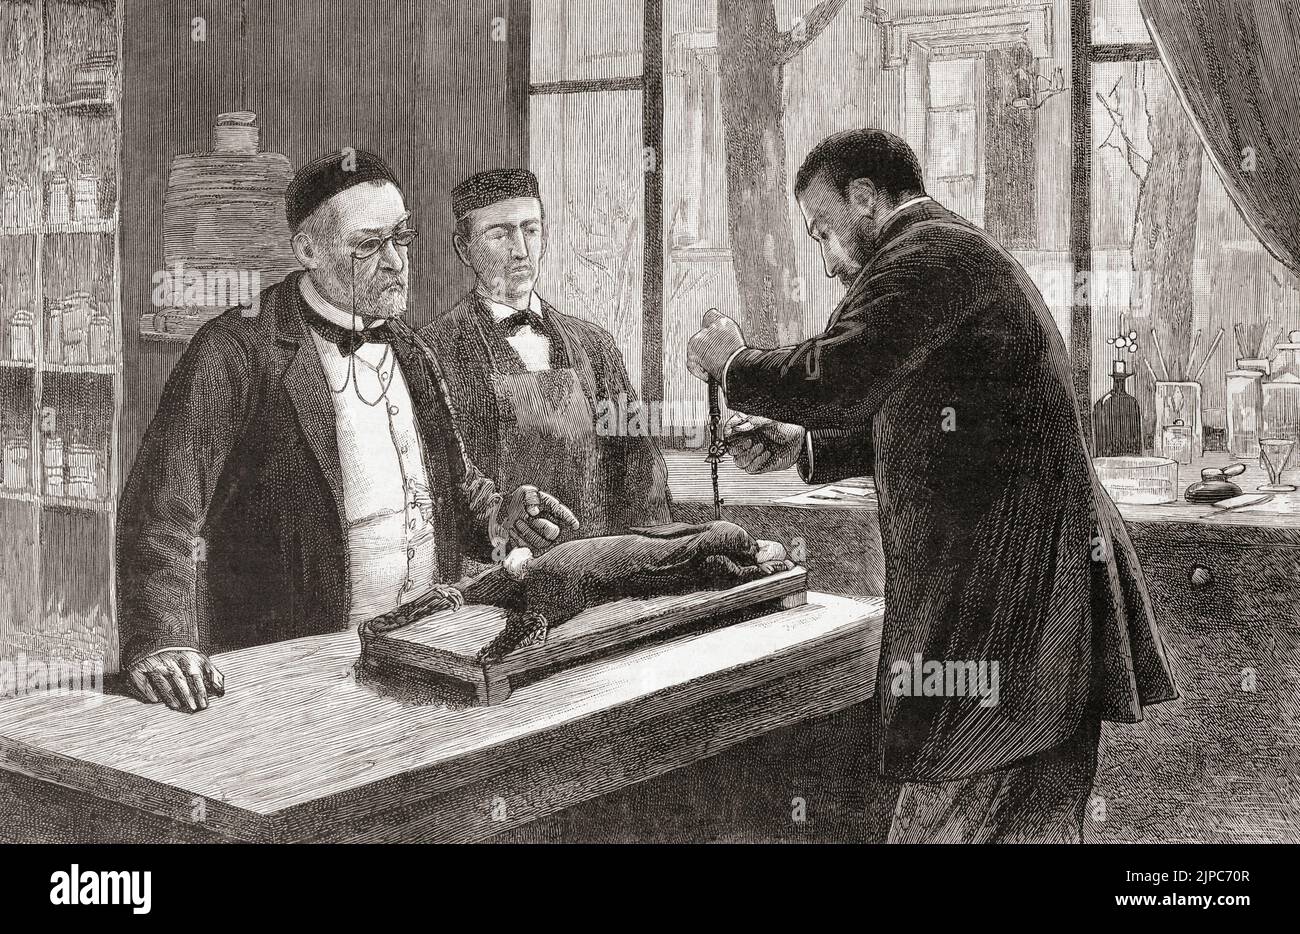 Associates of Louis Pasteur (left) conduct an experiment under his instructions on a chloroformed rabbit.  Louis Pasteur, 1822 - 1895.  French chemist and microbioligist who discovered, amongst other things, pasteurization and the principlies of vaccination.  He was also an early modern proponent of the germ theory of diseases. Stock Photo